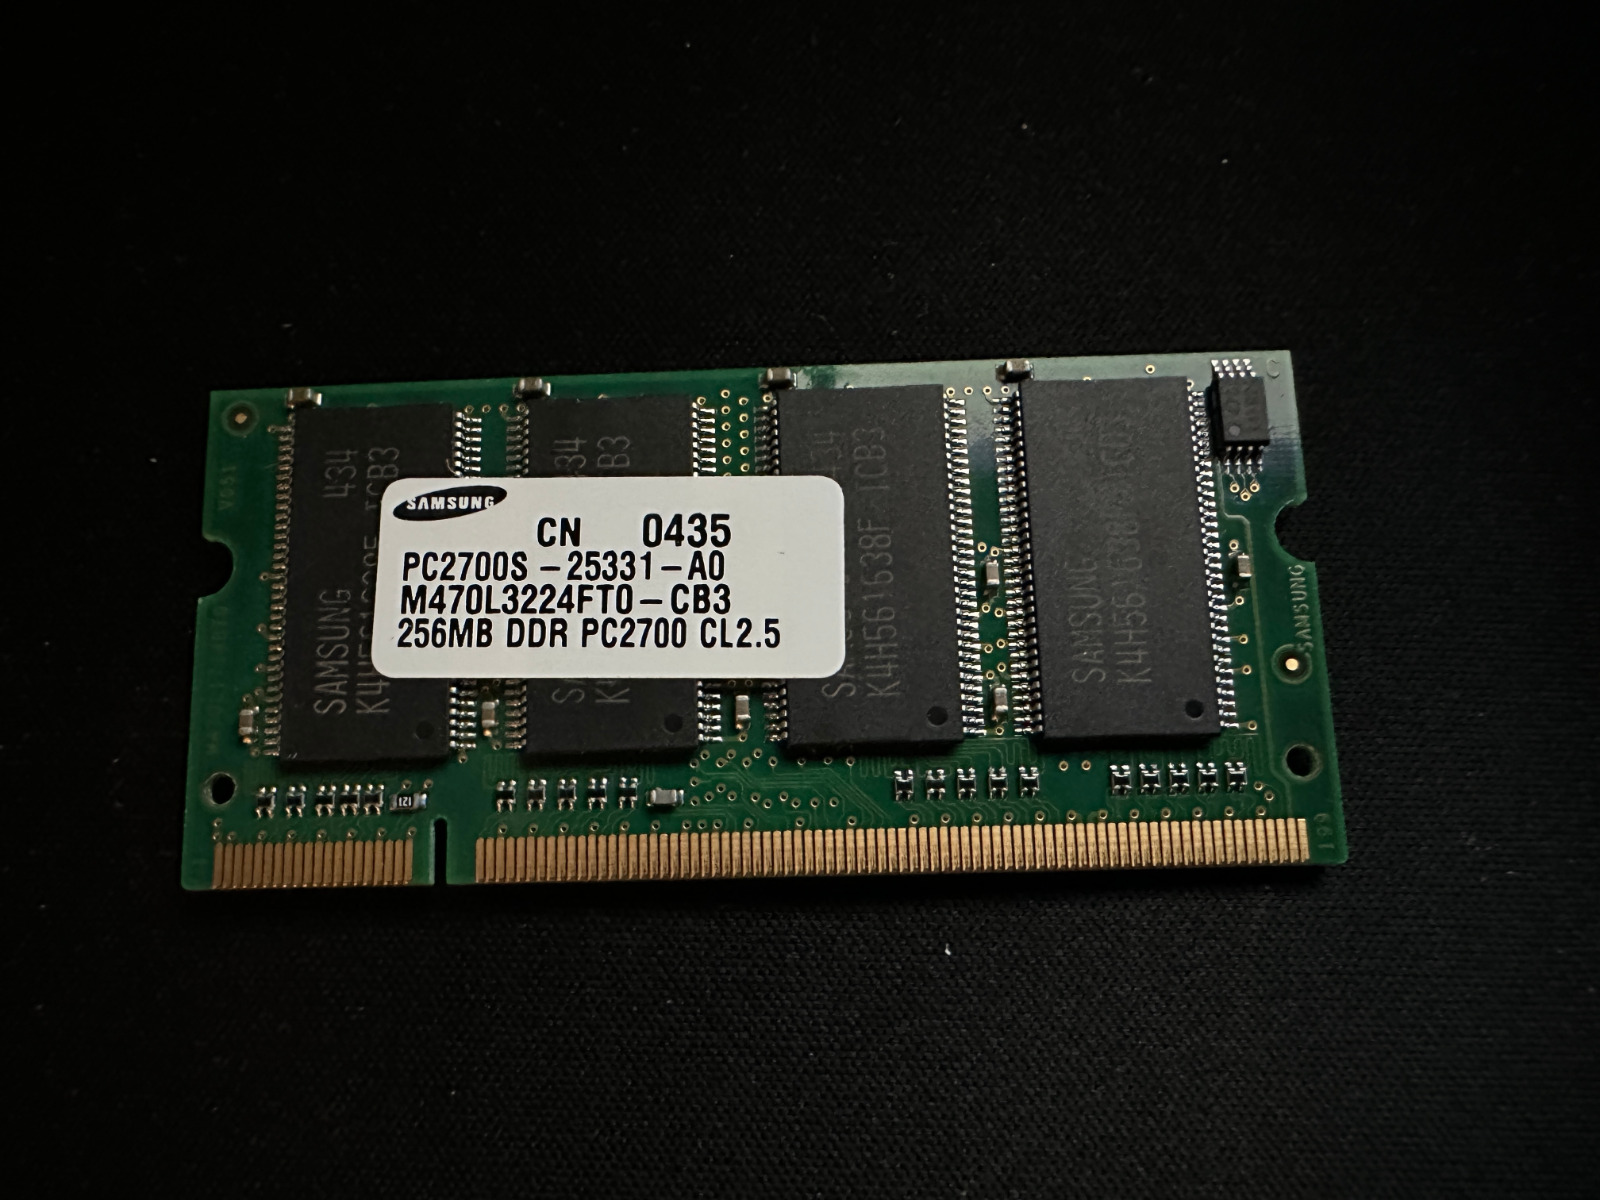 SAMSUNG 256MB DDR PC2700 CL2.5| PC2700S - 25331 - AO MEMORY